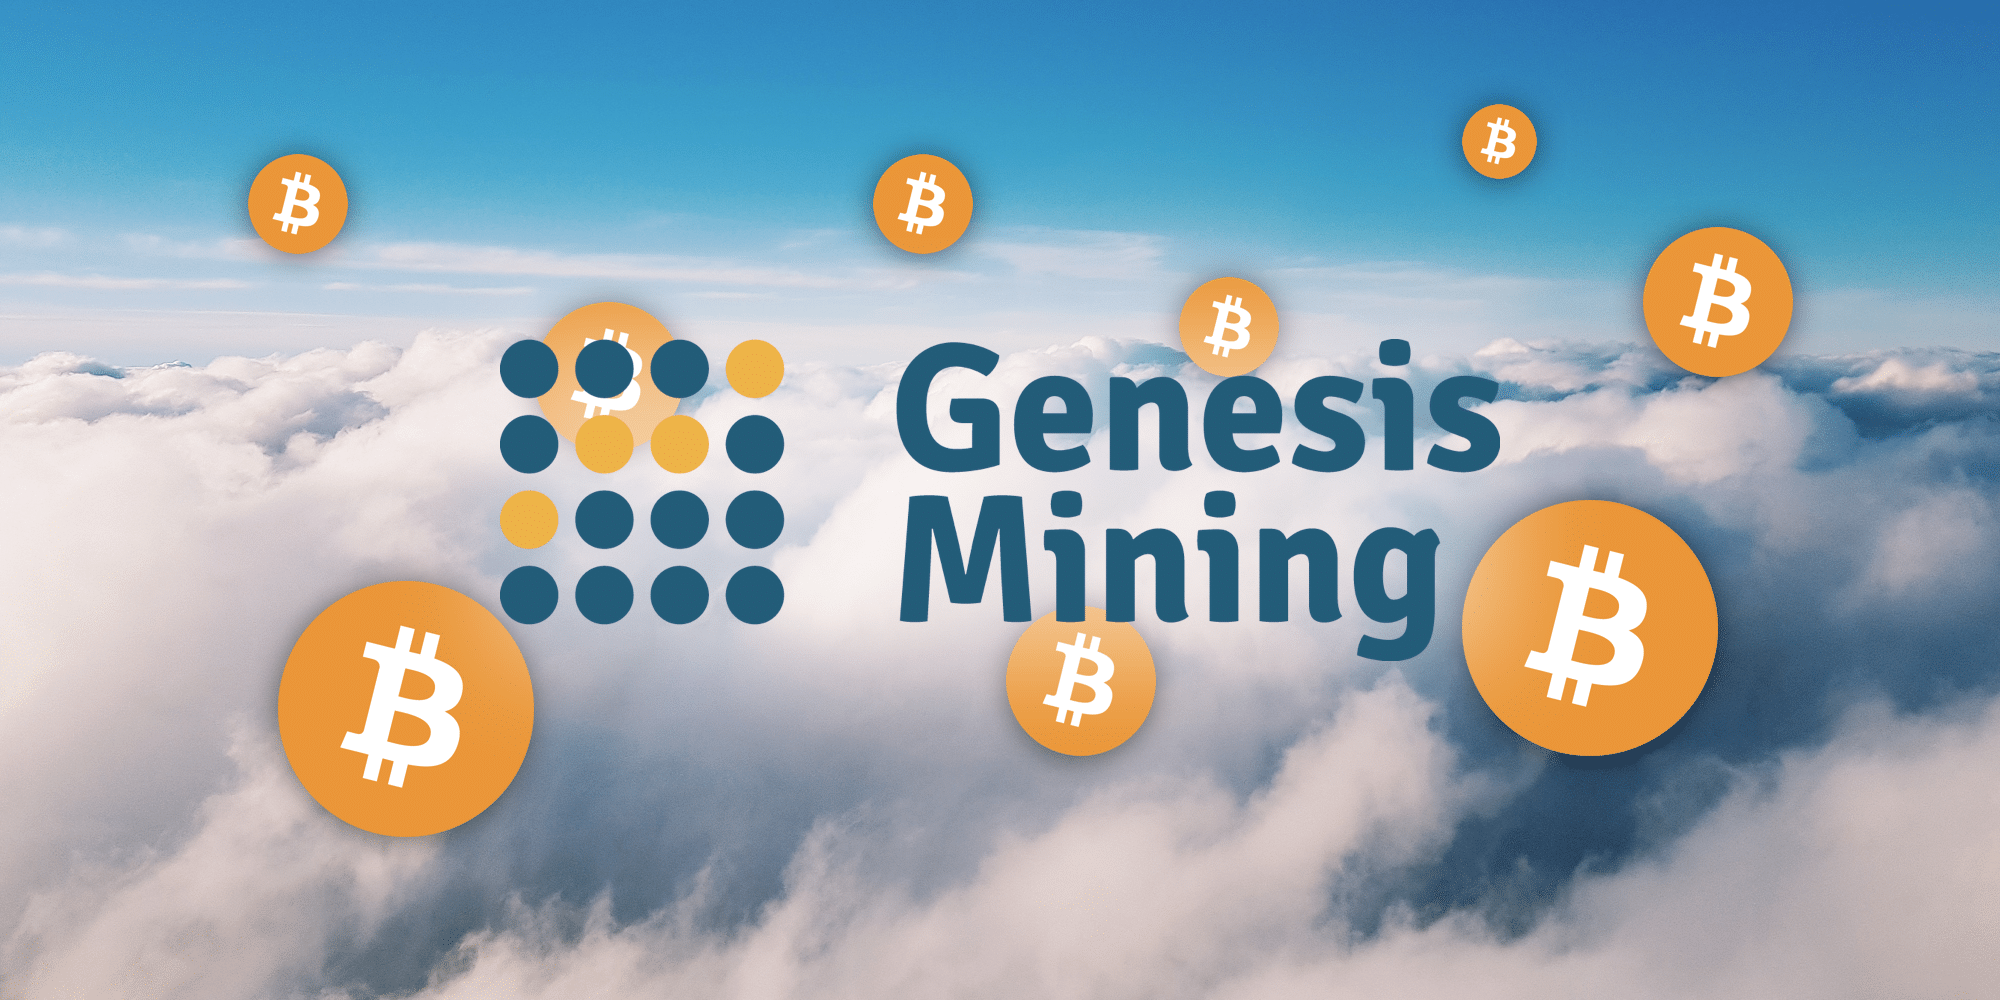 Genesis Mining Stock Photos and Pictures - Images | Shutterstock